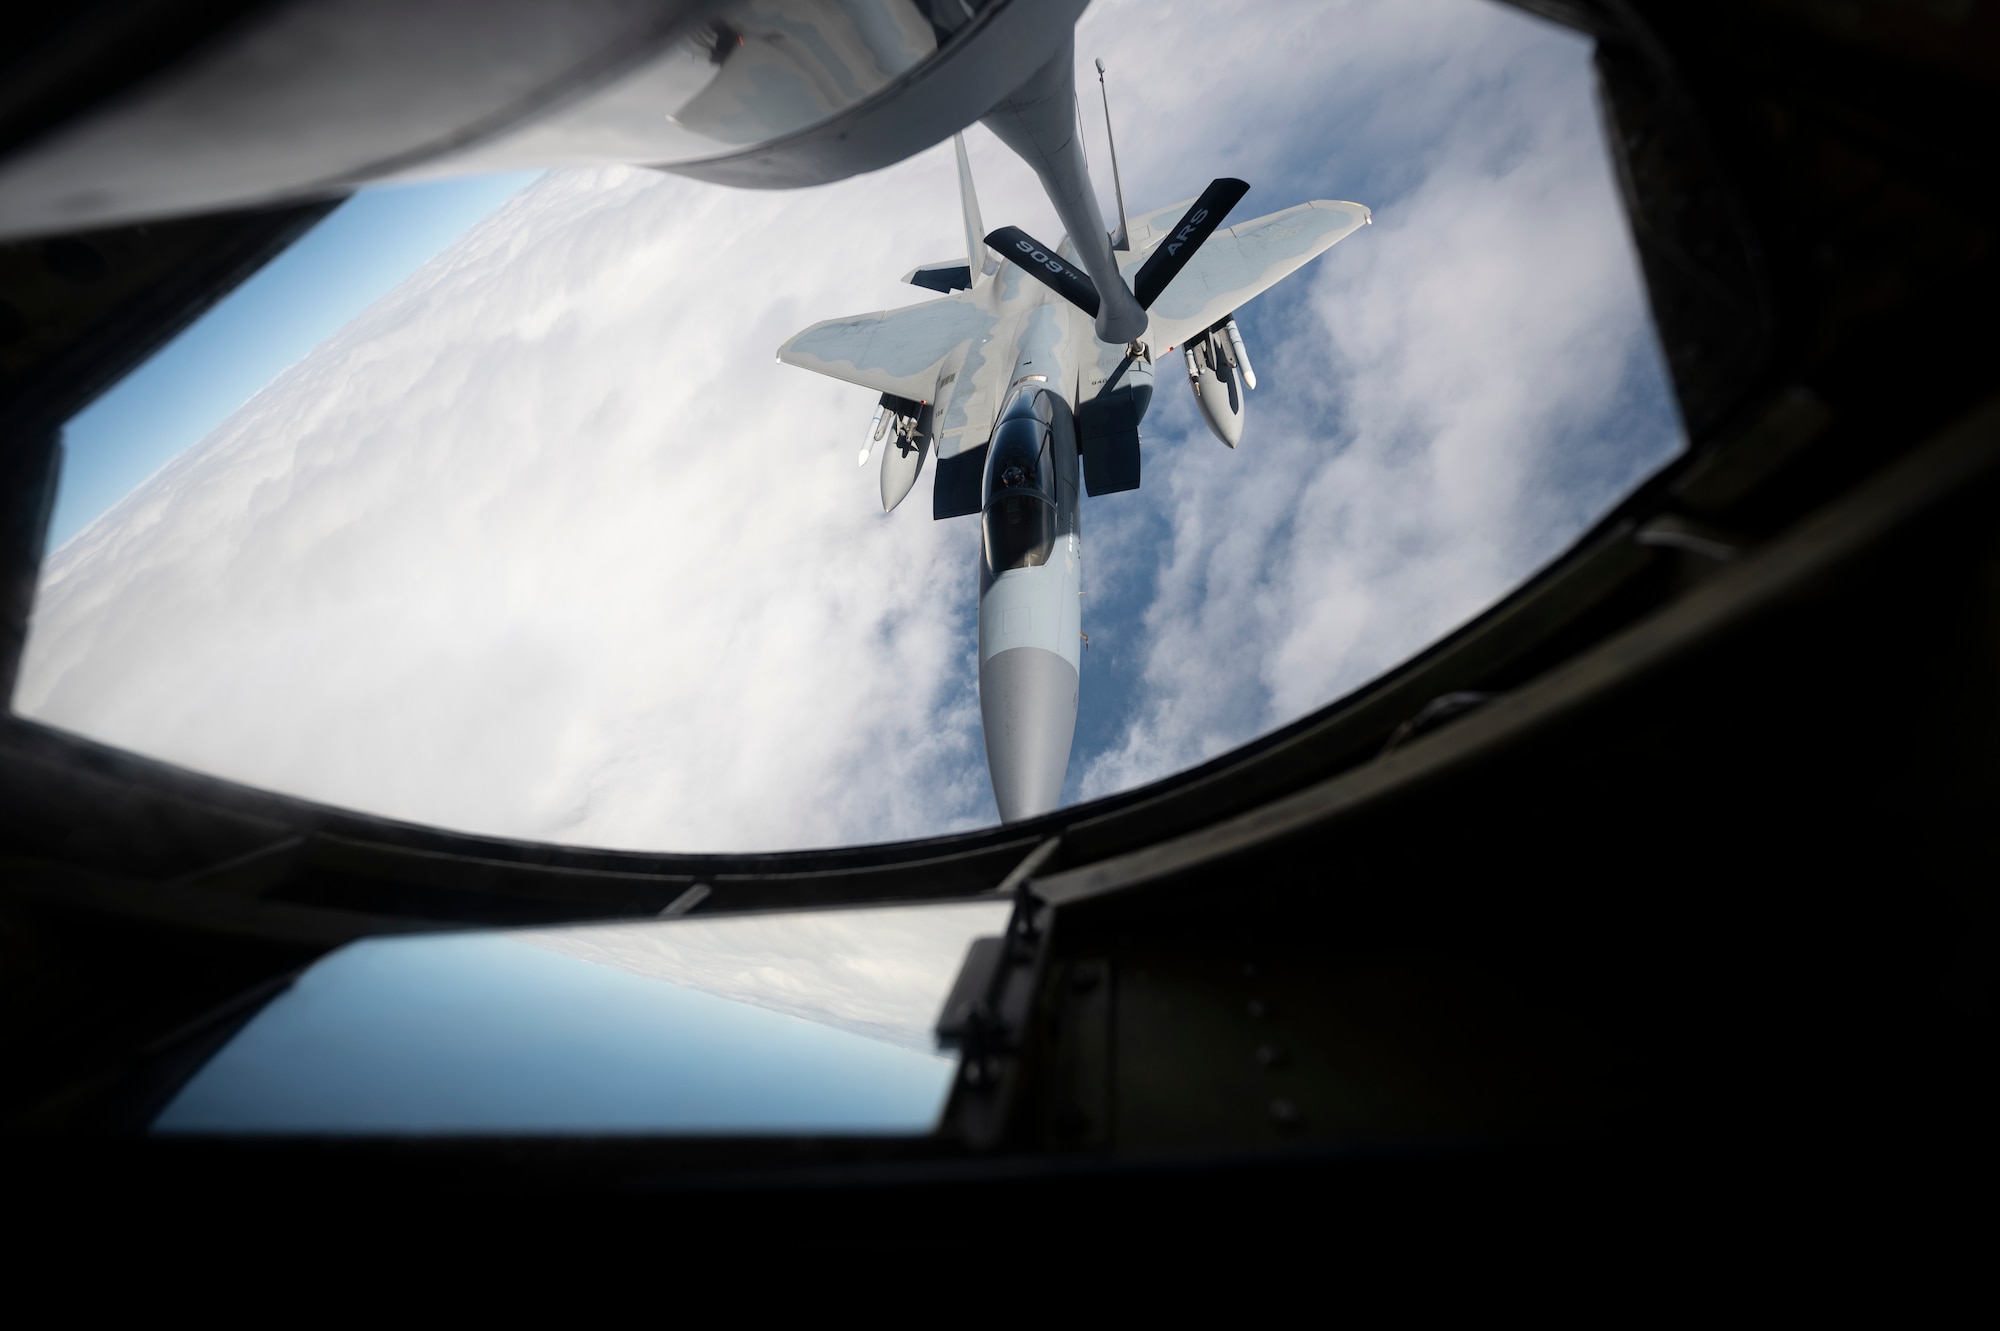 A 44th Fighter Squadron F-15C Eagle receives fuel from a 909th Air Refueling Squadron KC-135 Stratotanker during a flight over the Pacific Ocean in support of exercise Keen Sword 23, Nov. 17, 2022. Joint and bilateral cooperation and collaboration enhance regional security, stability, and prosperity. (U.S. Air Force photo by Senior Airman Jessi Roth)